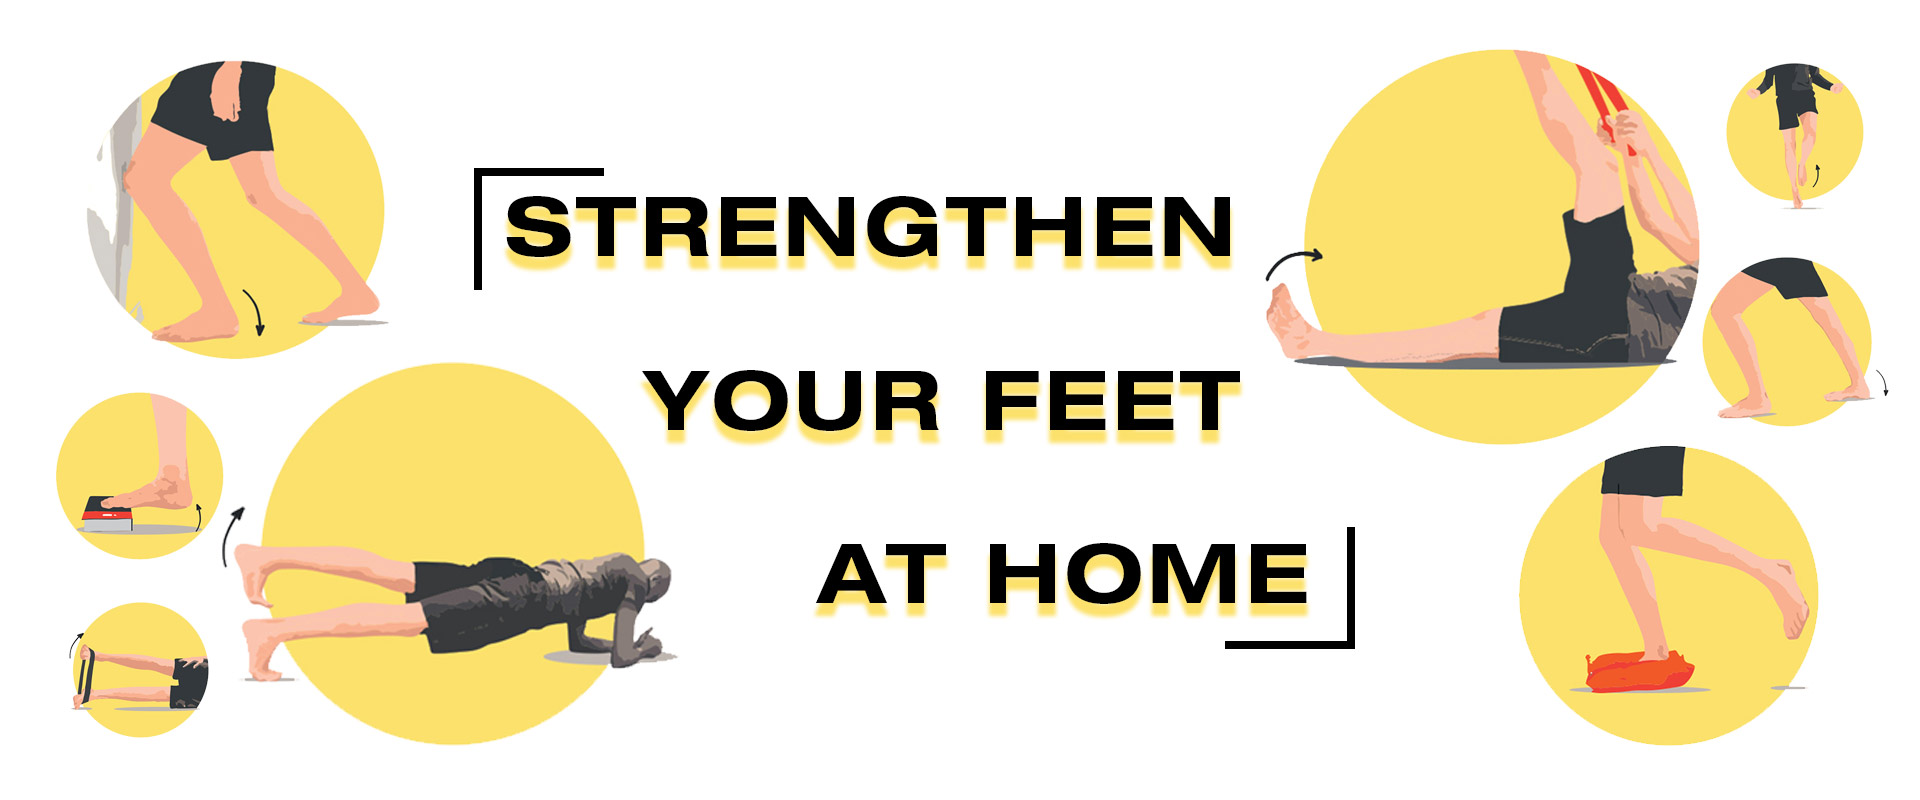 Strengthen your feet at home!